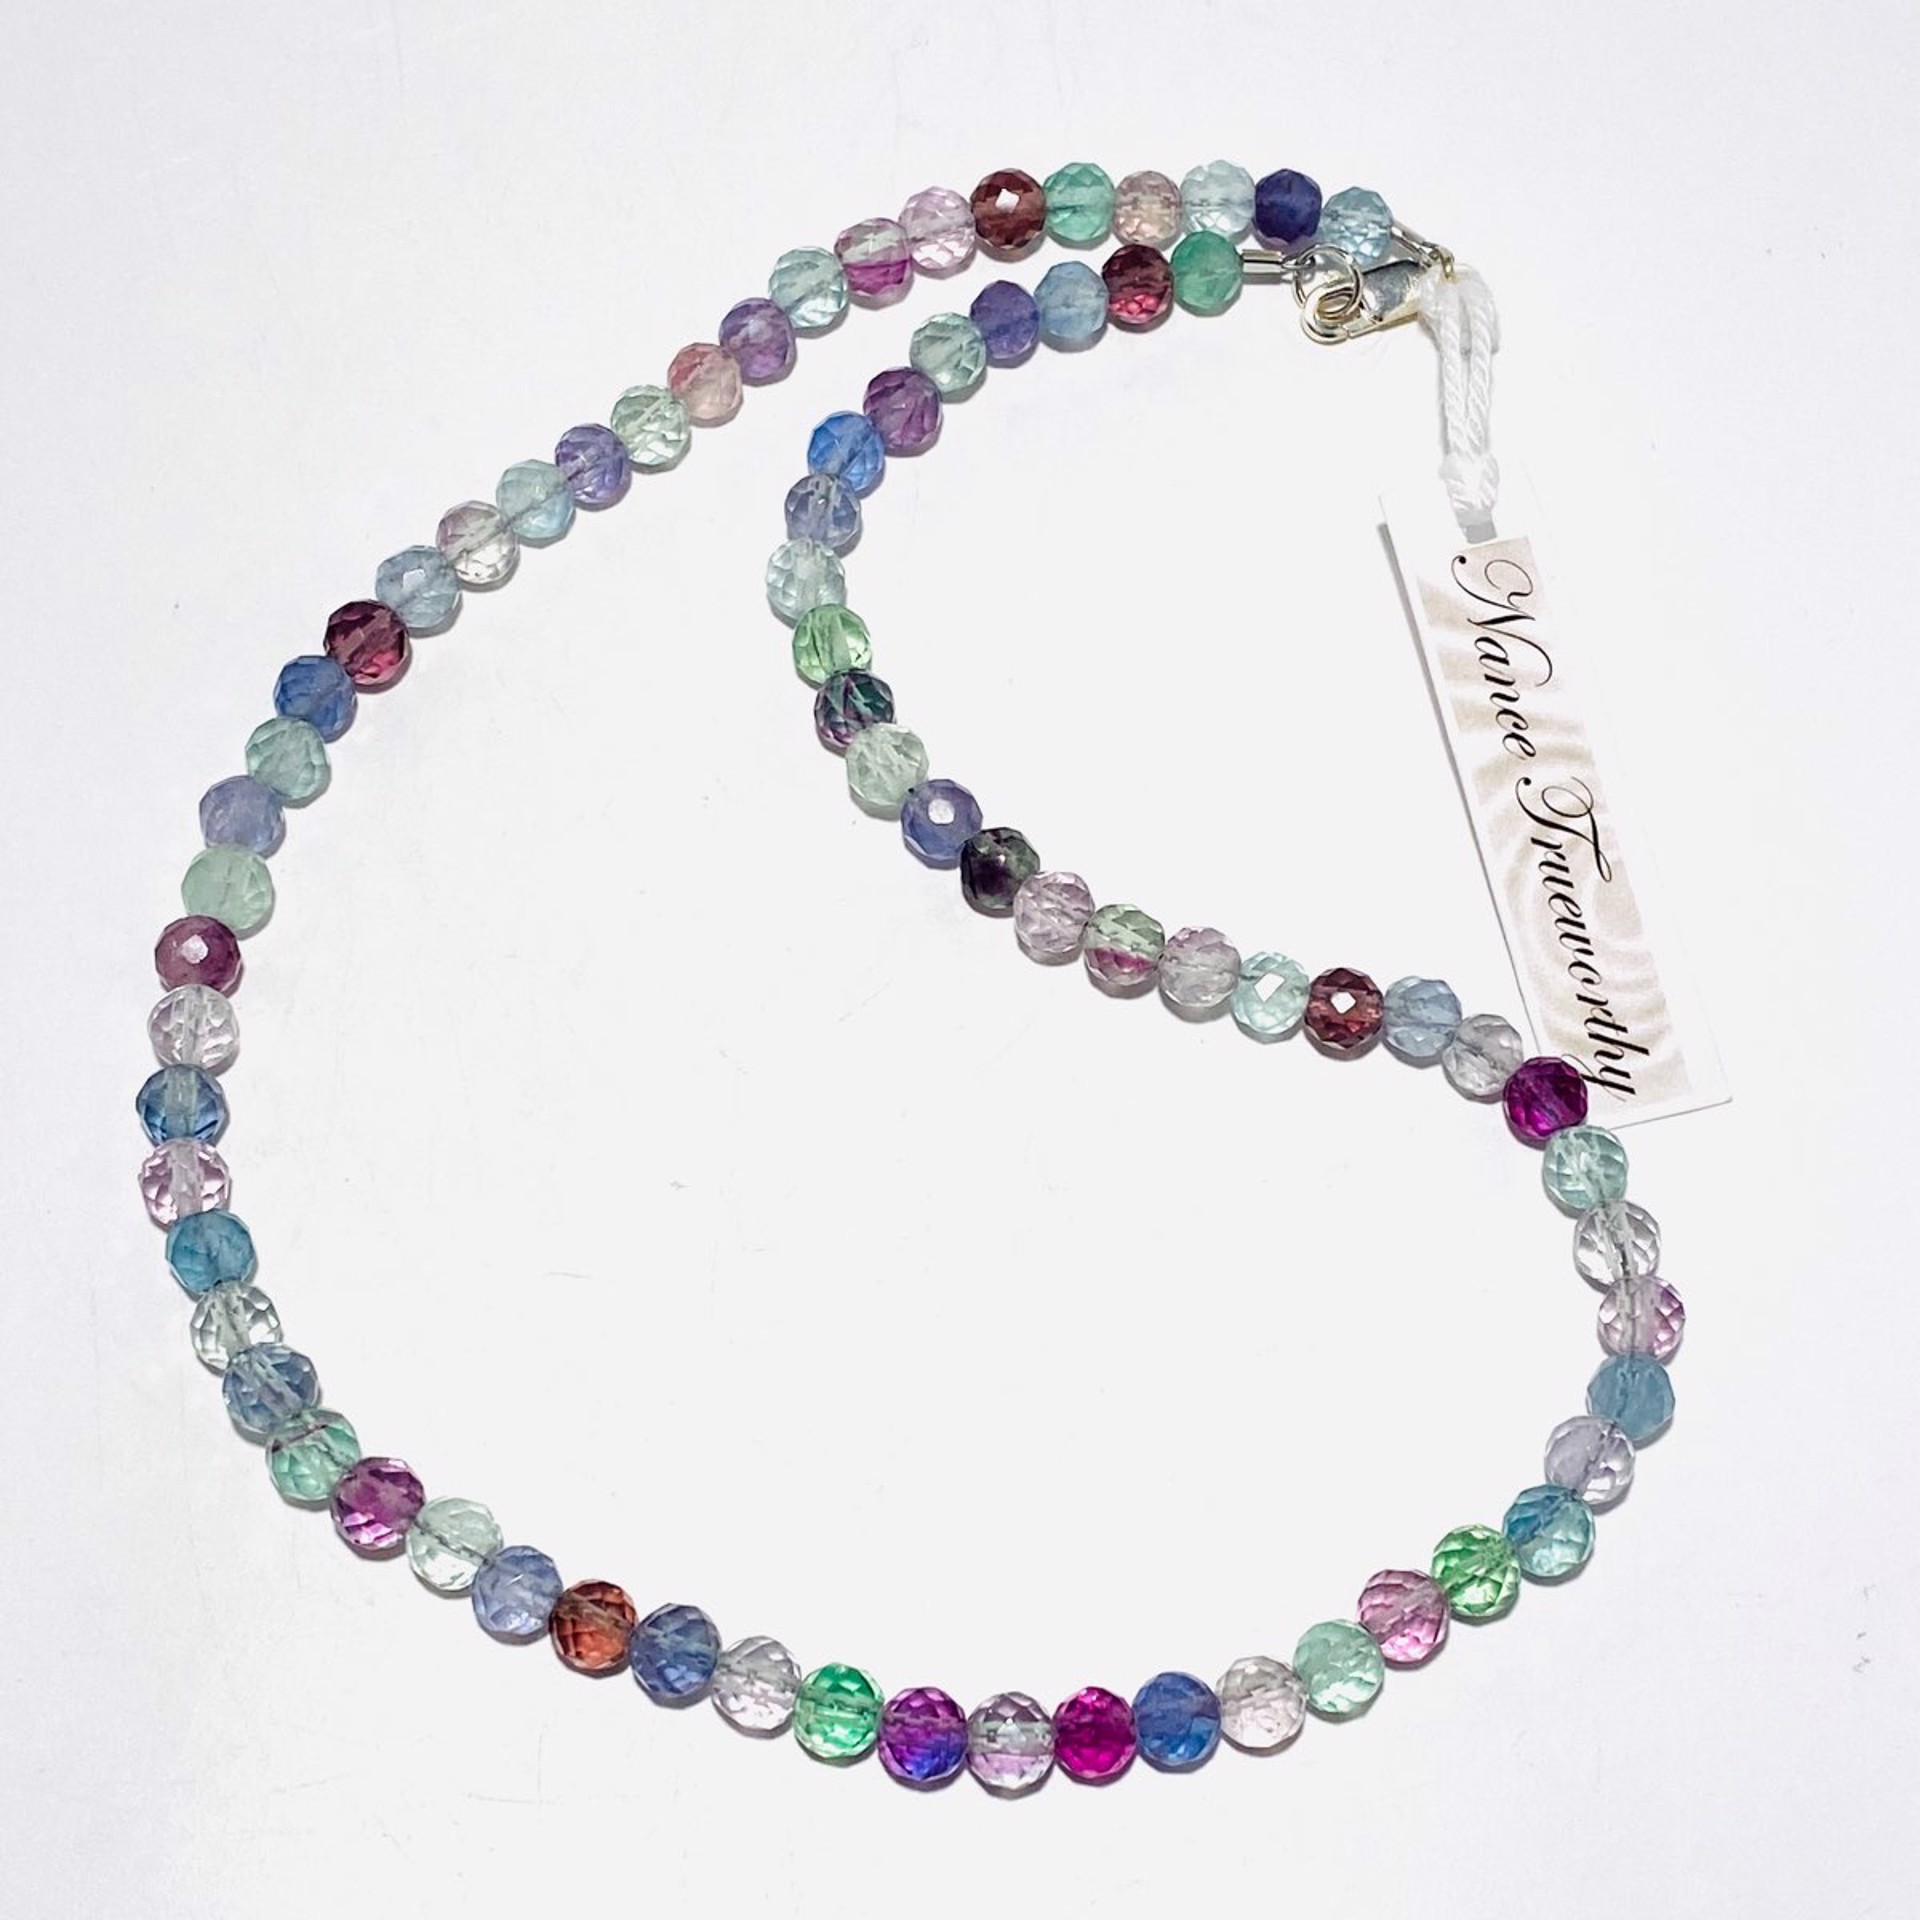 NT23-5 Round Faceted Fluorite Strand Necklace by Nance Trueworthy